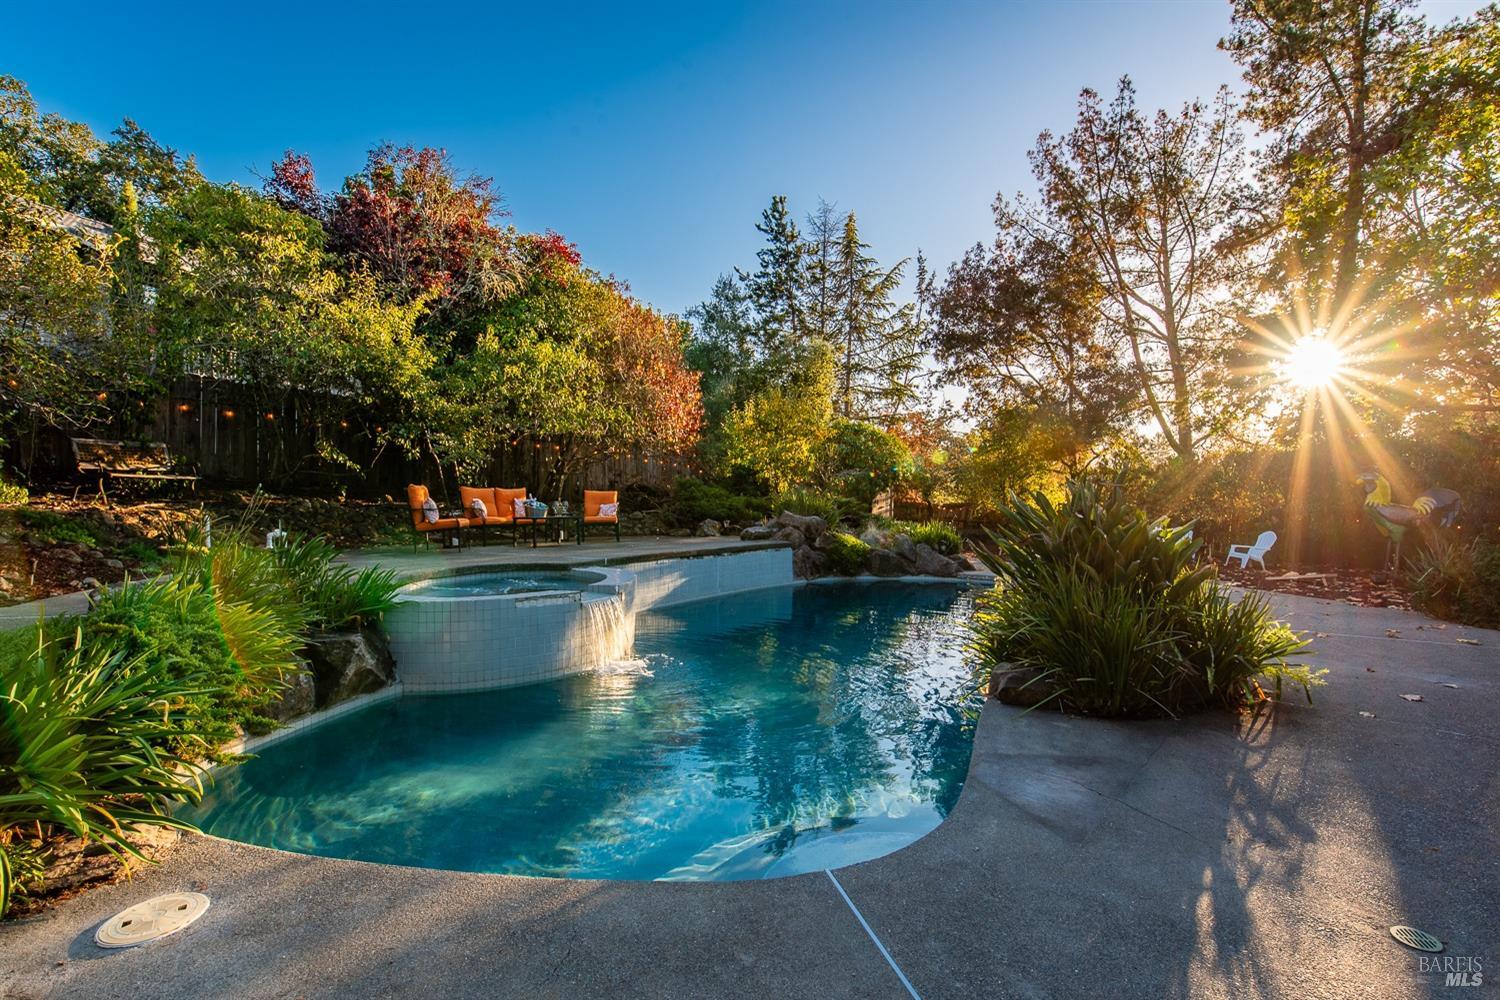 Entertaining is a dream on this private .48 acre lot. Primary suite is located on the ground level with view of the pool with waterfall. Enjoy the sunset from your own backyard.